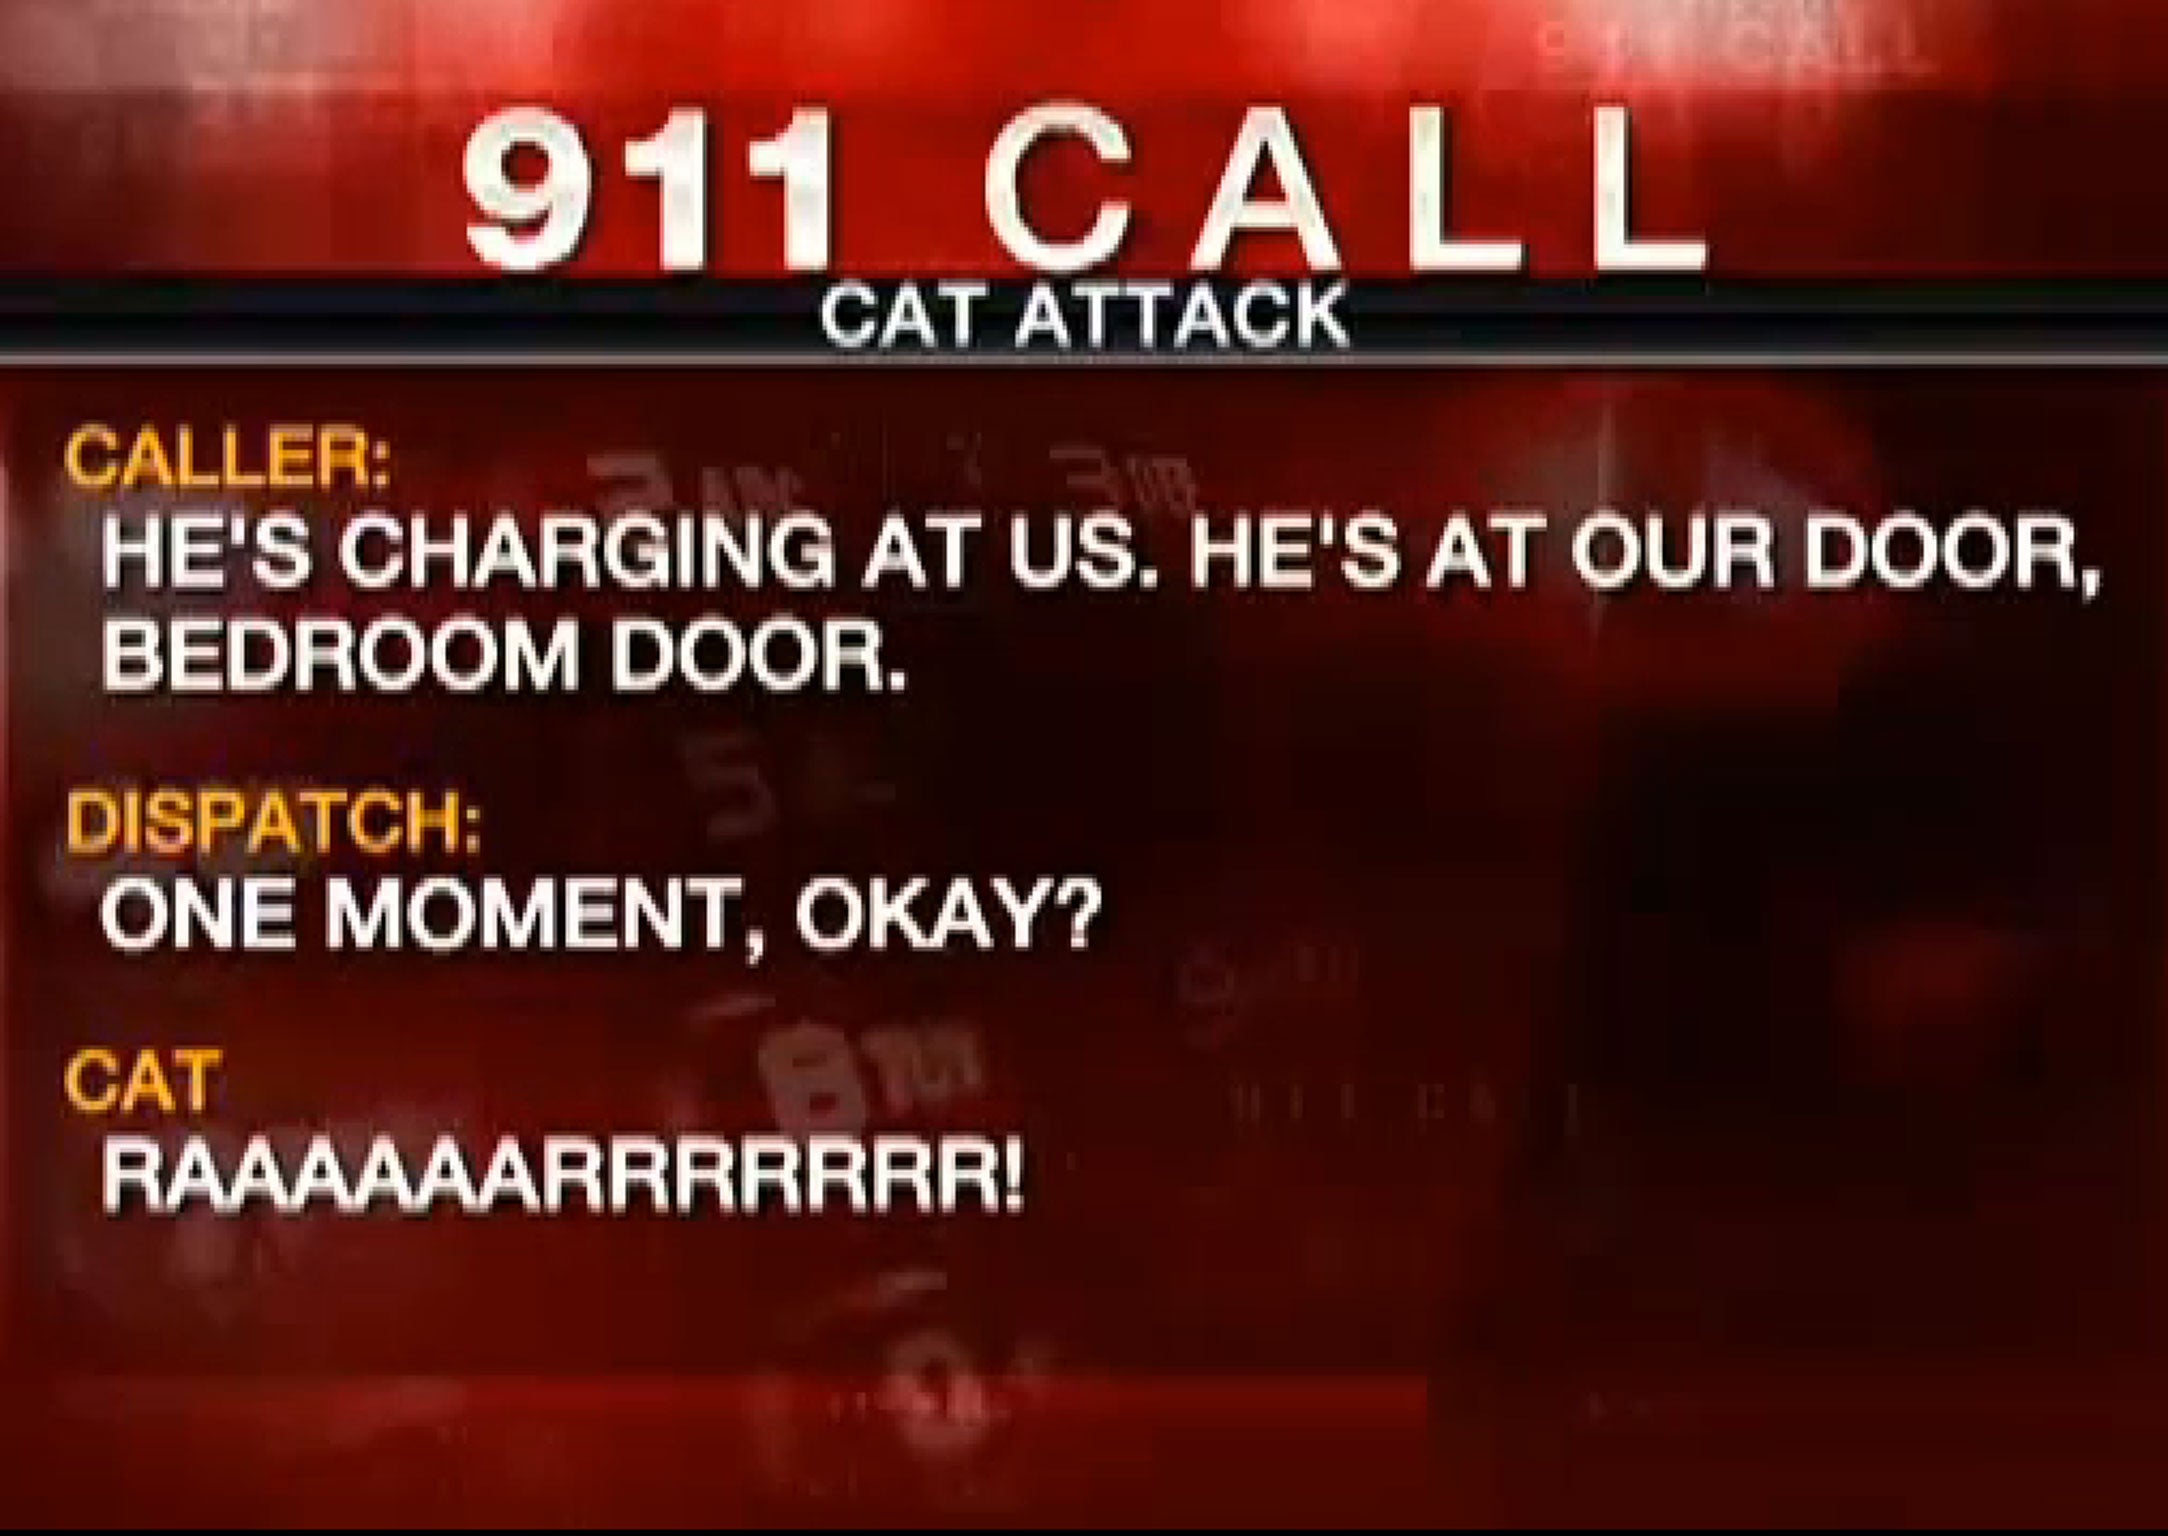 The 911 call - quoting the cat.